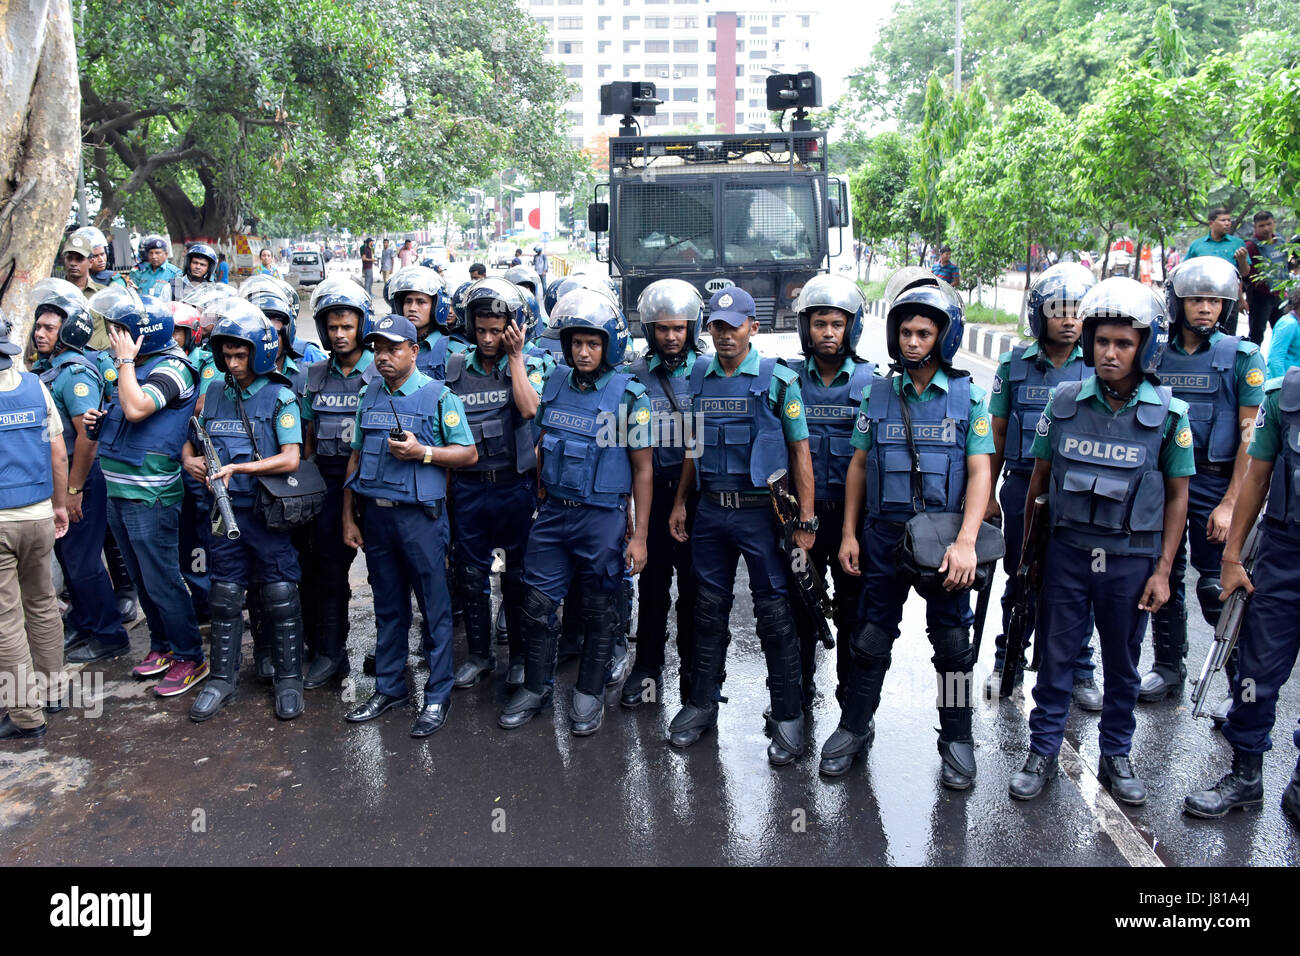 Dhaka, Bangladesh. 26th May, 2017.  Police have lobbed teargas shells and water canon to disband people protesting the removal of Lady Justice's statue from the Supreme Court premises, in Dhaka, Bangladesh, May 26, 2017. The statue was removed from its spot near the court's entrance on Thursday night, following demands by radical Islamist outfit Hifazat-e-Islam. Enraged by the decision, leftist student bodies began demonstrating outside the court premise and announced protests for the morning. Credit: SK Hasan Ali/Alamy Live News Stock Photo